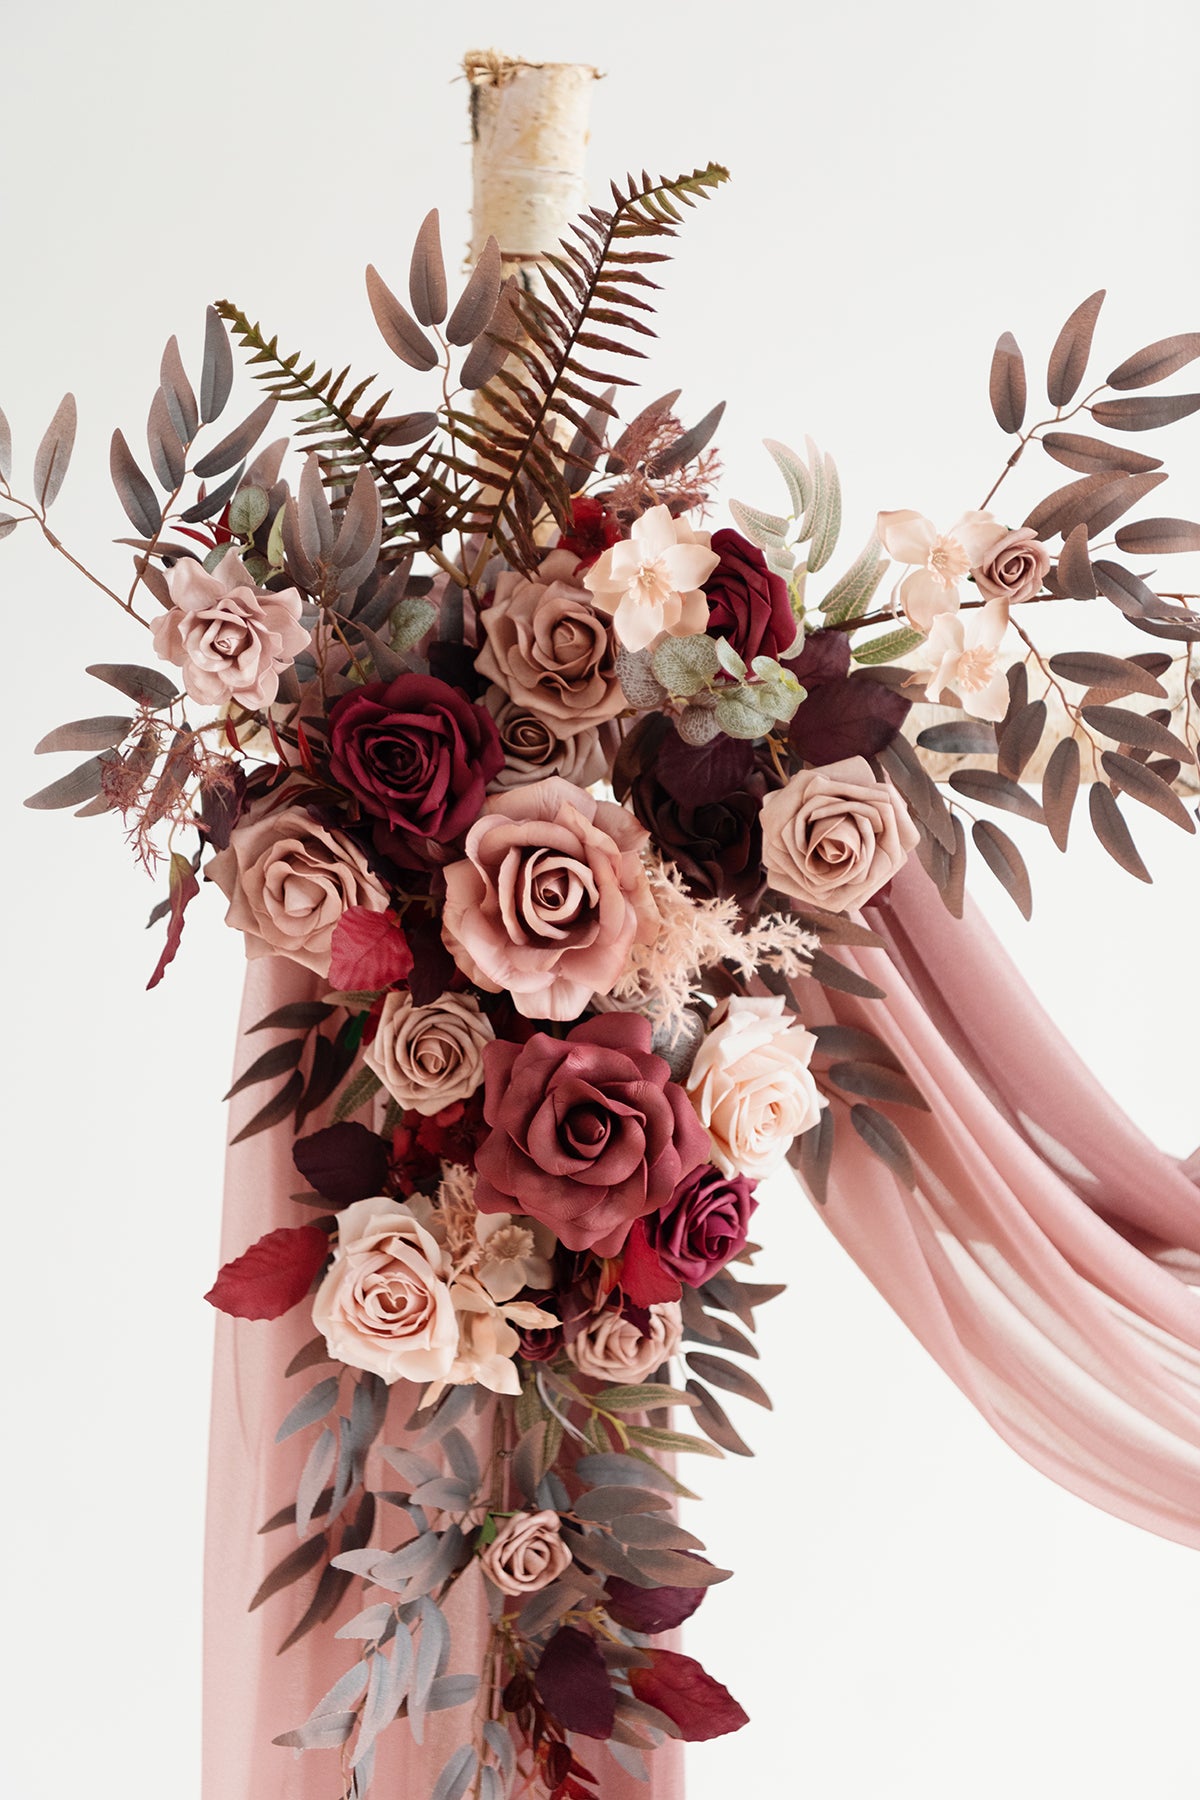 Flower Arch Decor with Drapes in Burgundy & Dusty Rose | Clearance